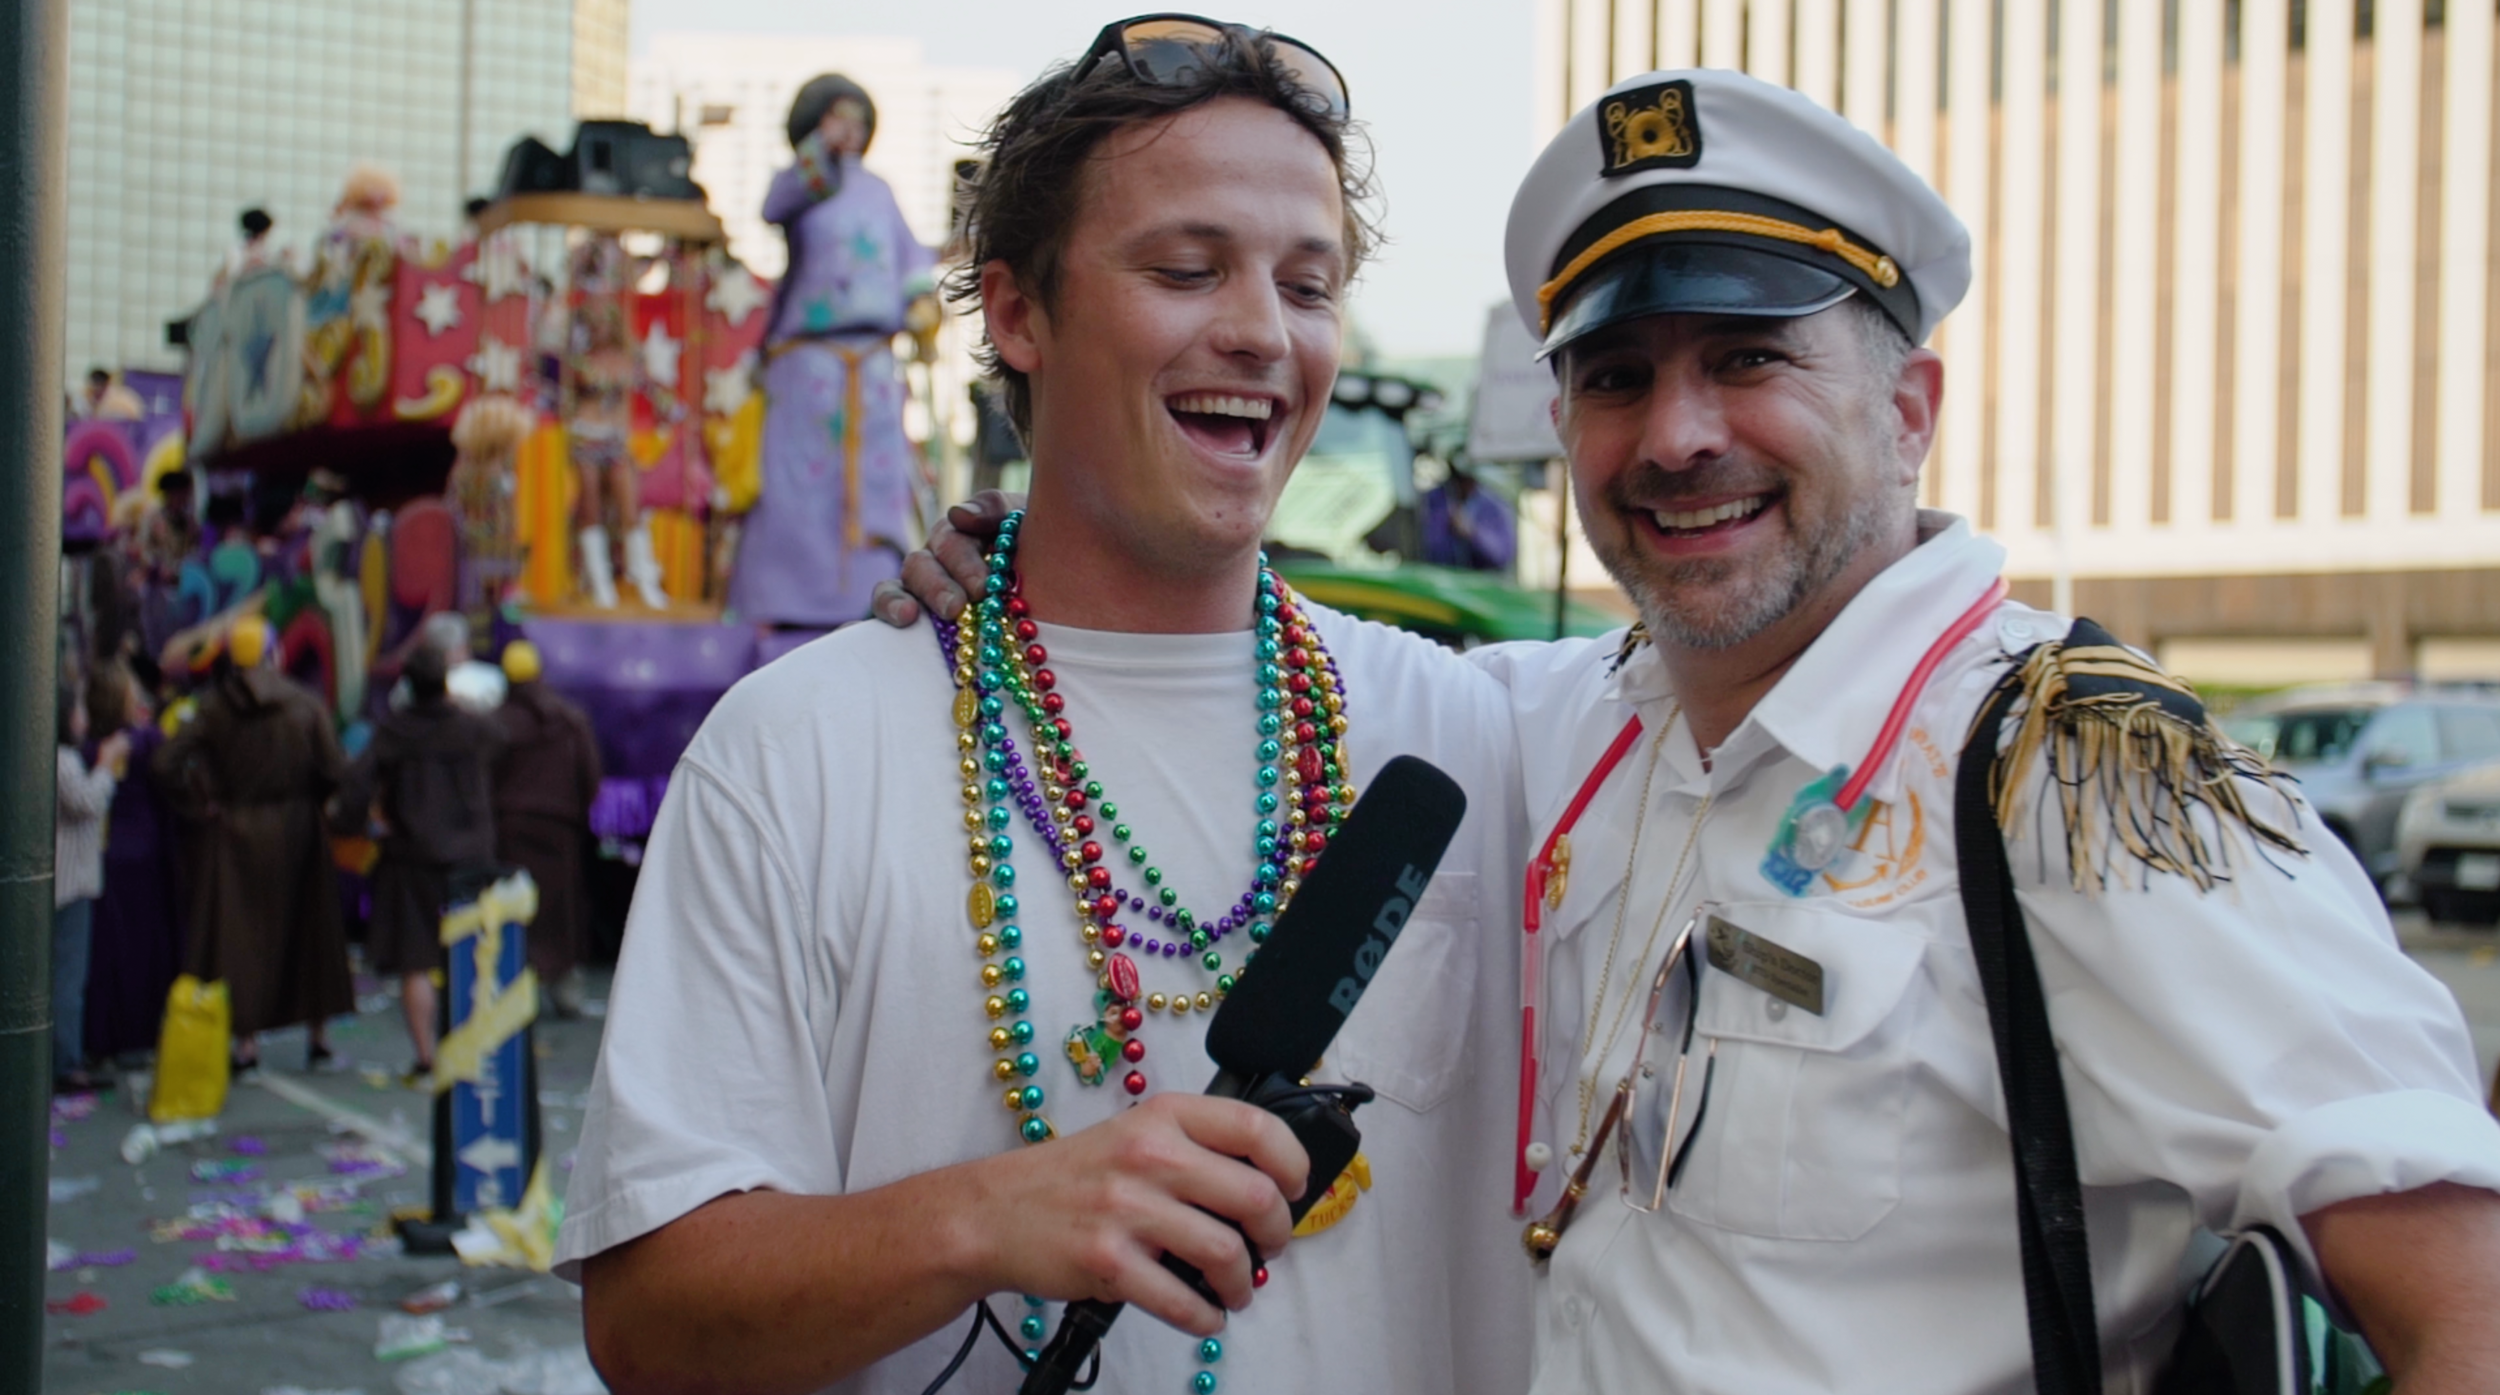 The Future of a Wasteful Mardi Gras Tradition